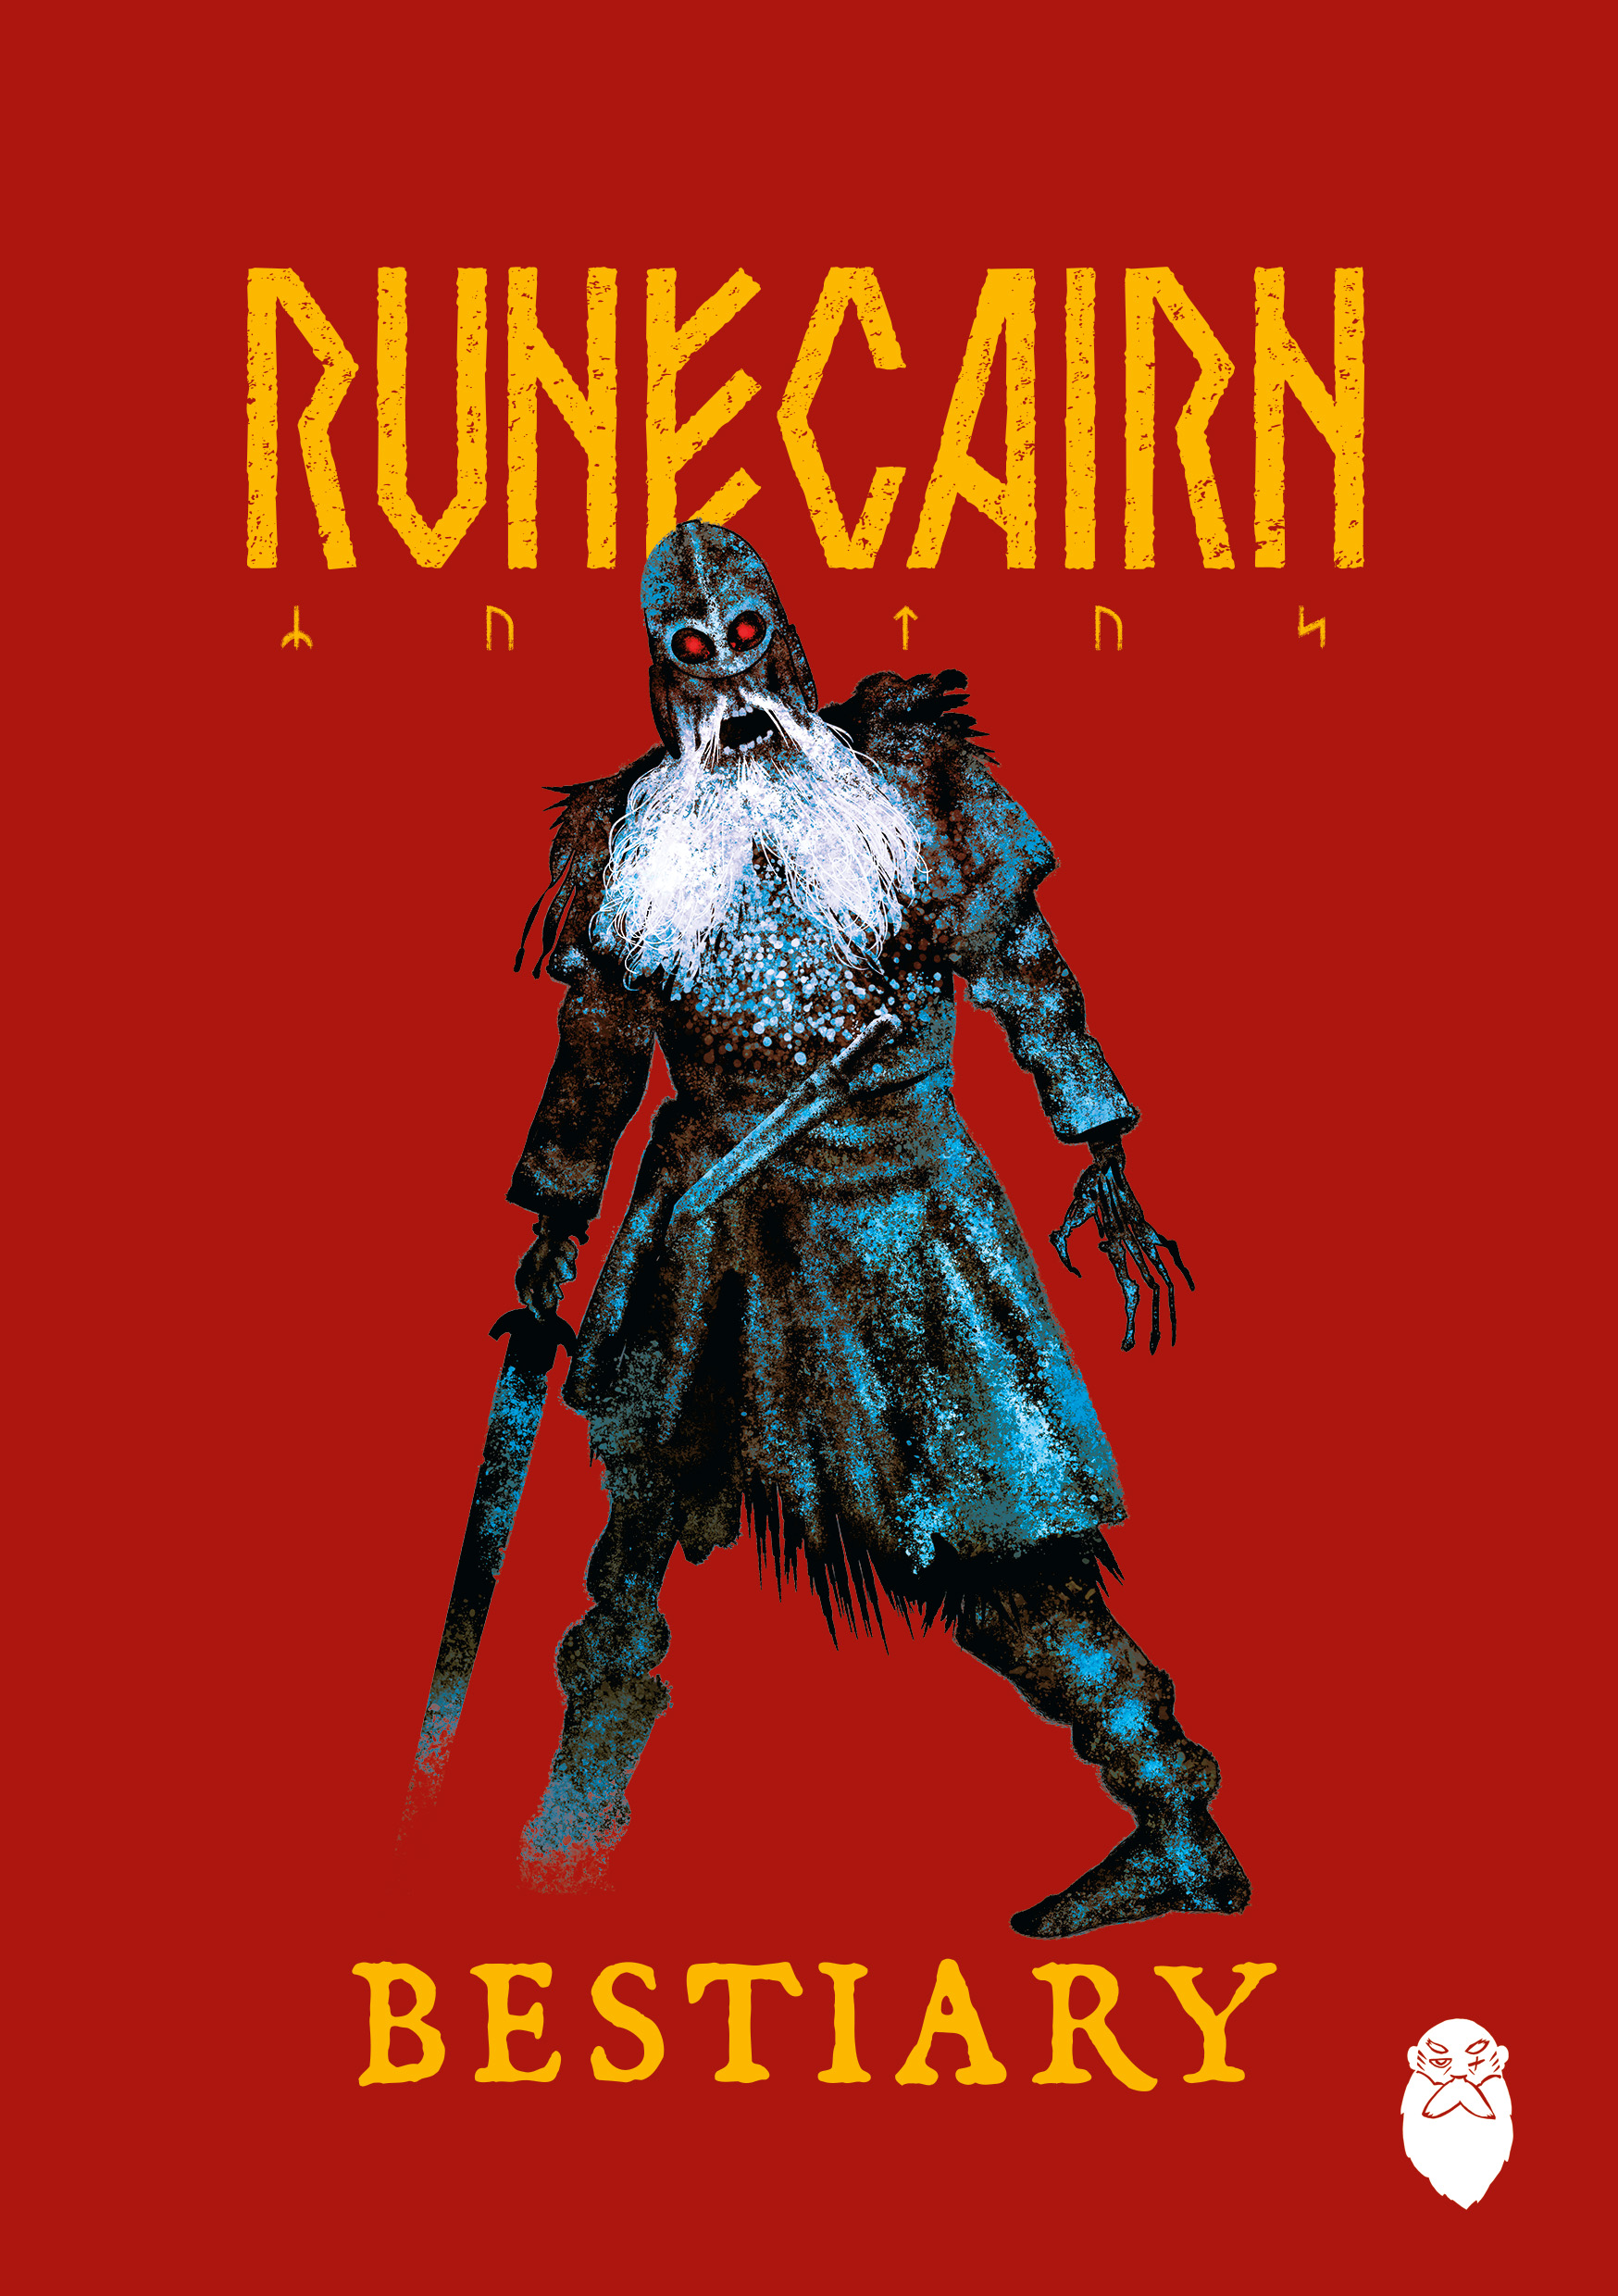 The Runecairn Bestiary is Itchfunding Now! Cover